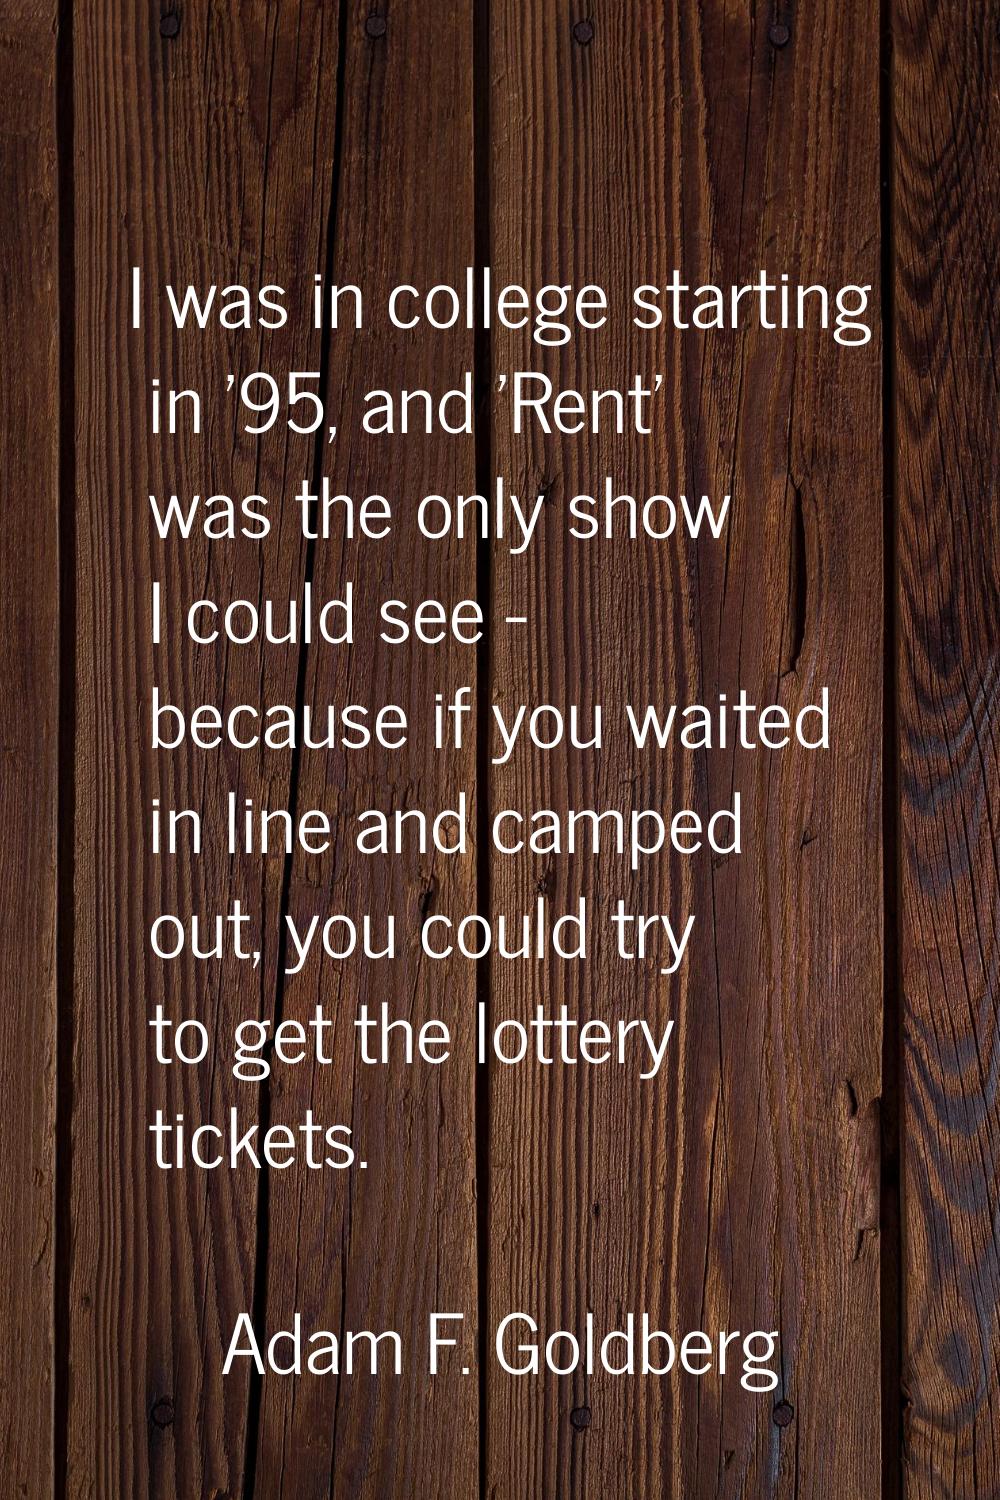 I was in college starting in '95, and 'Rent' was the only show I could see - because if you waited 